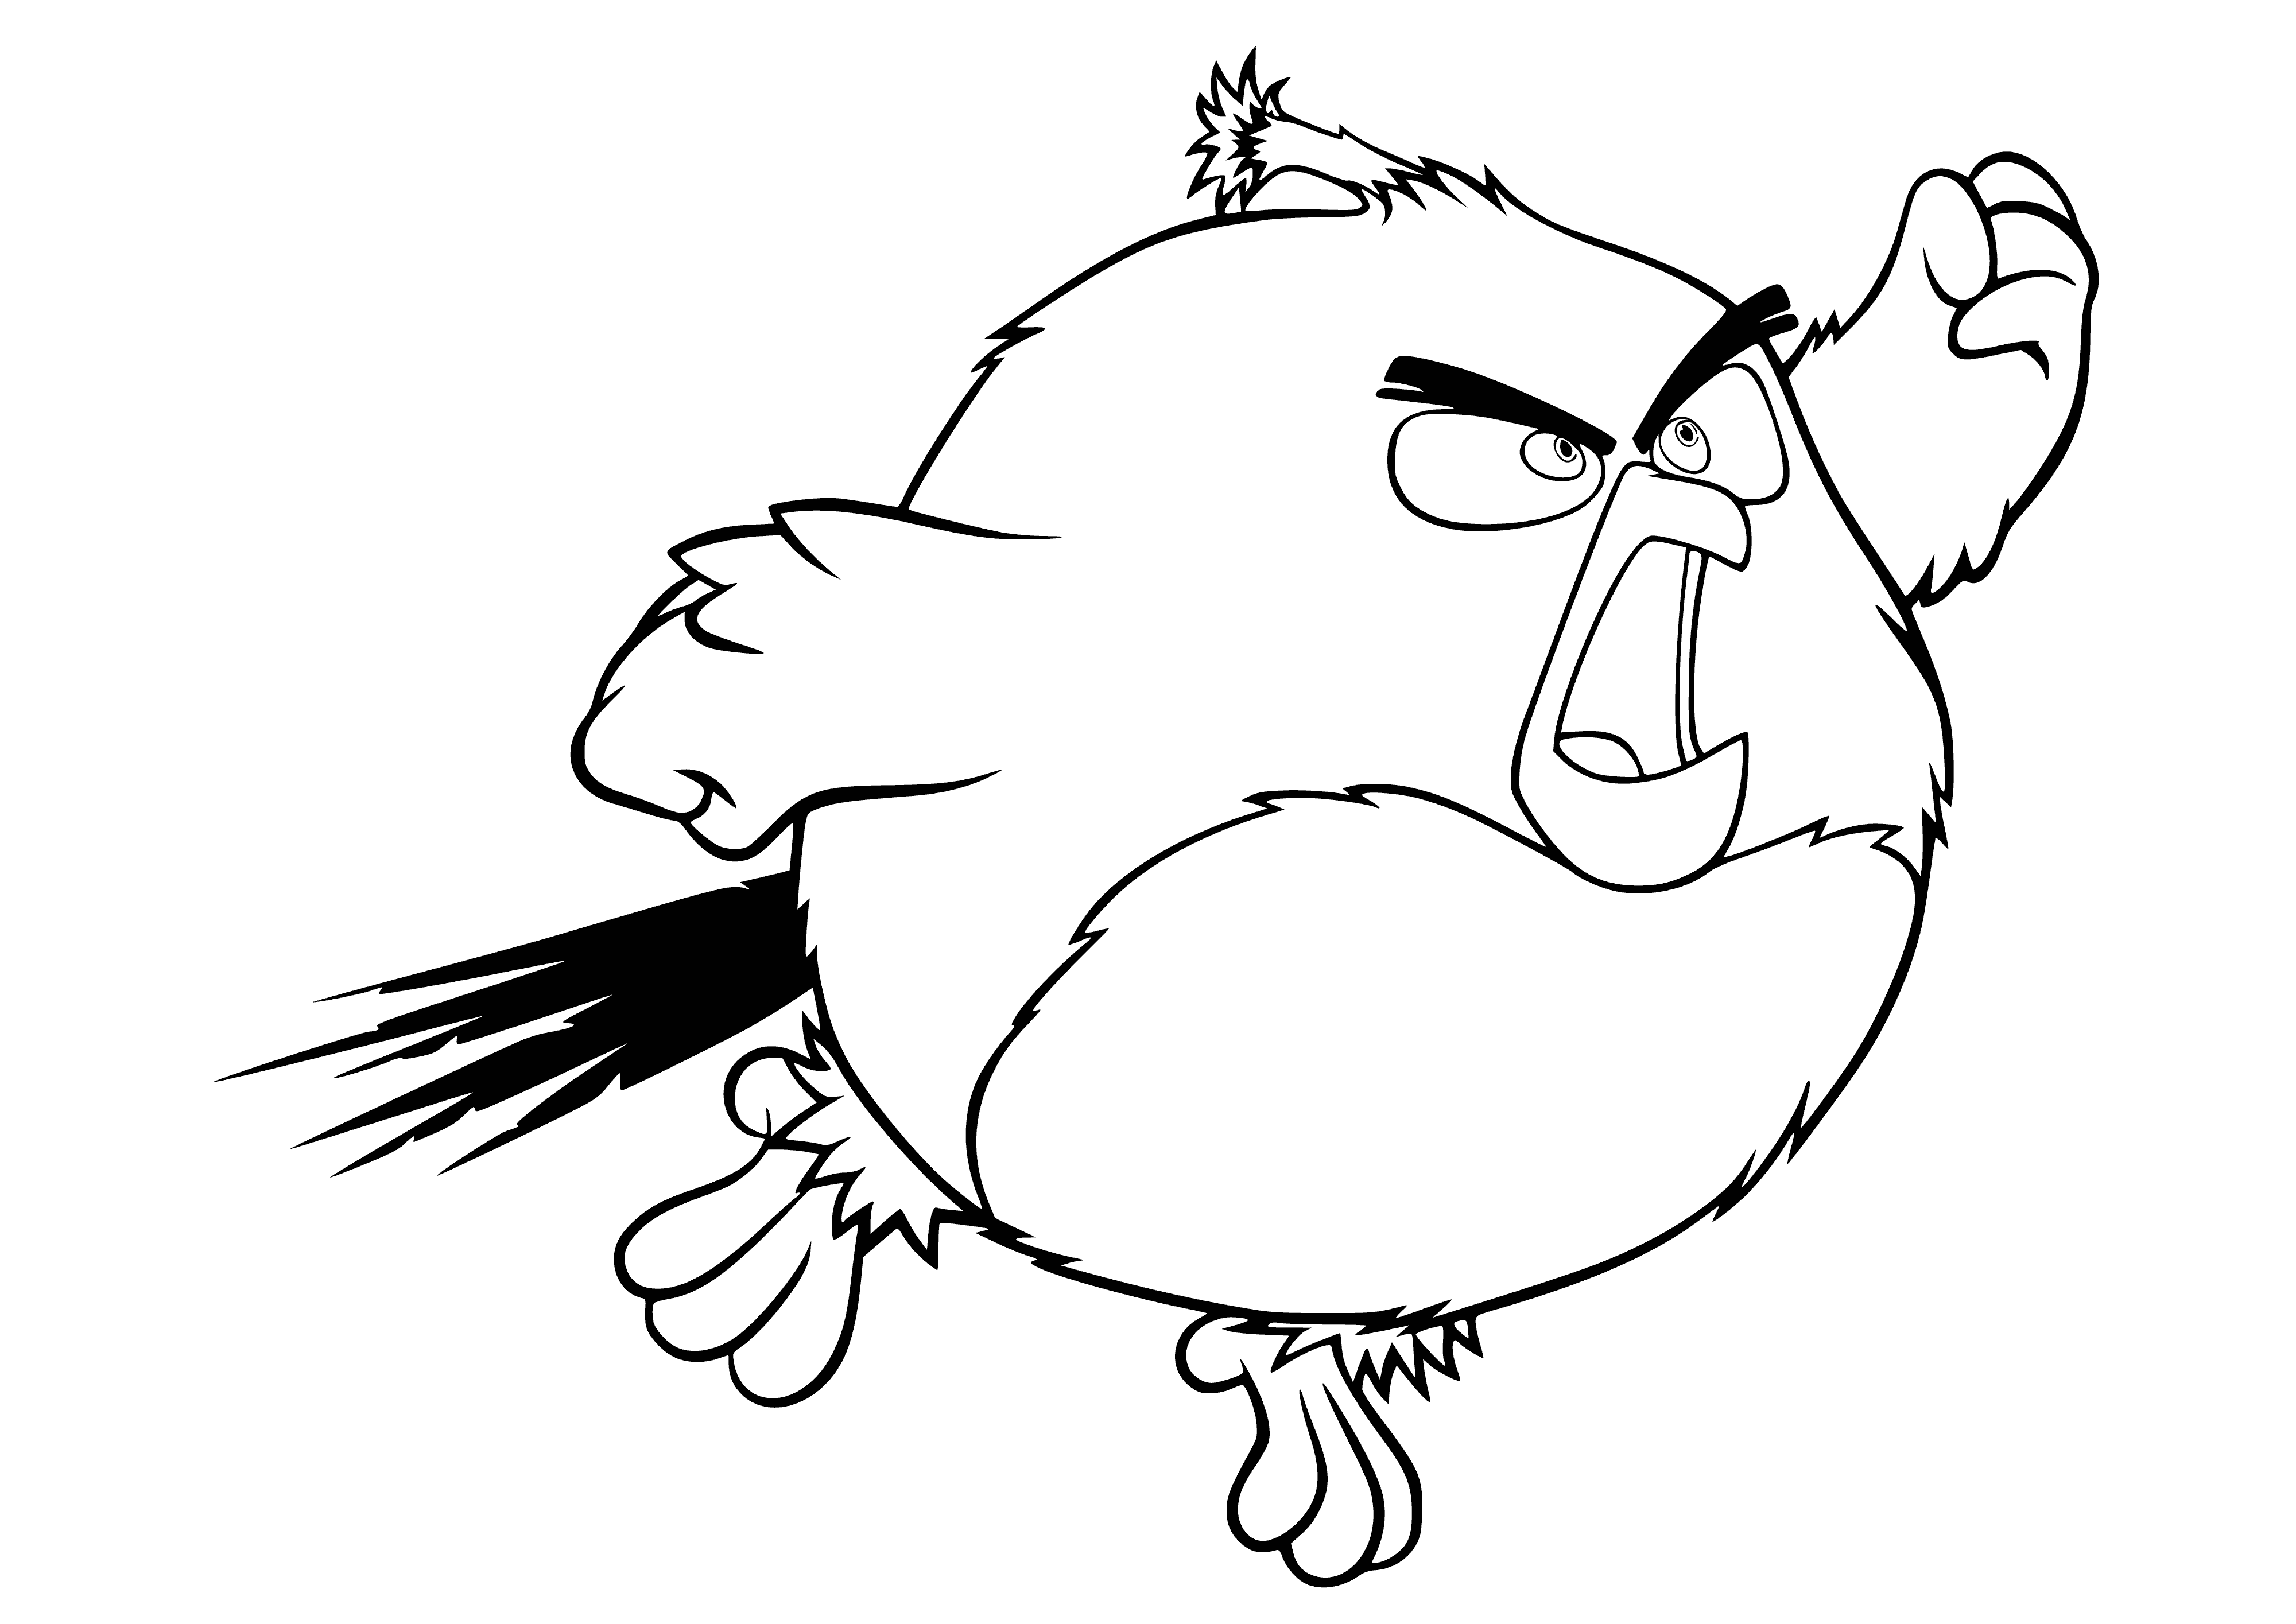 coloring page: Pigs are trying to hide but the birds are too determined to give up.

Angry birds are attacking pigs in the sky; pigs are desperately searching for a hideout.